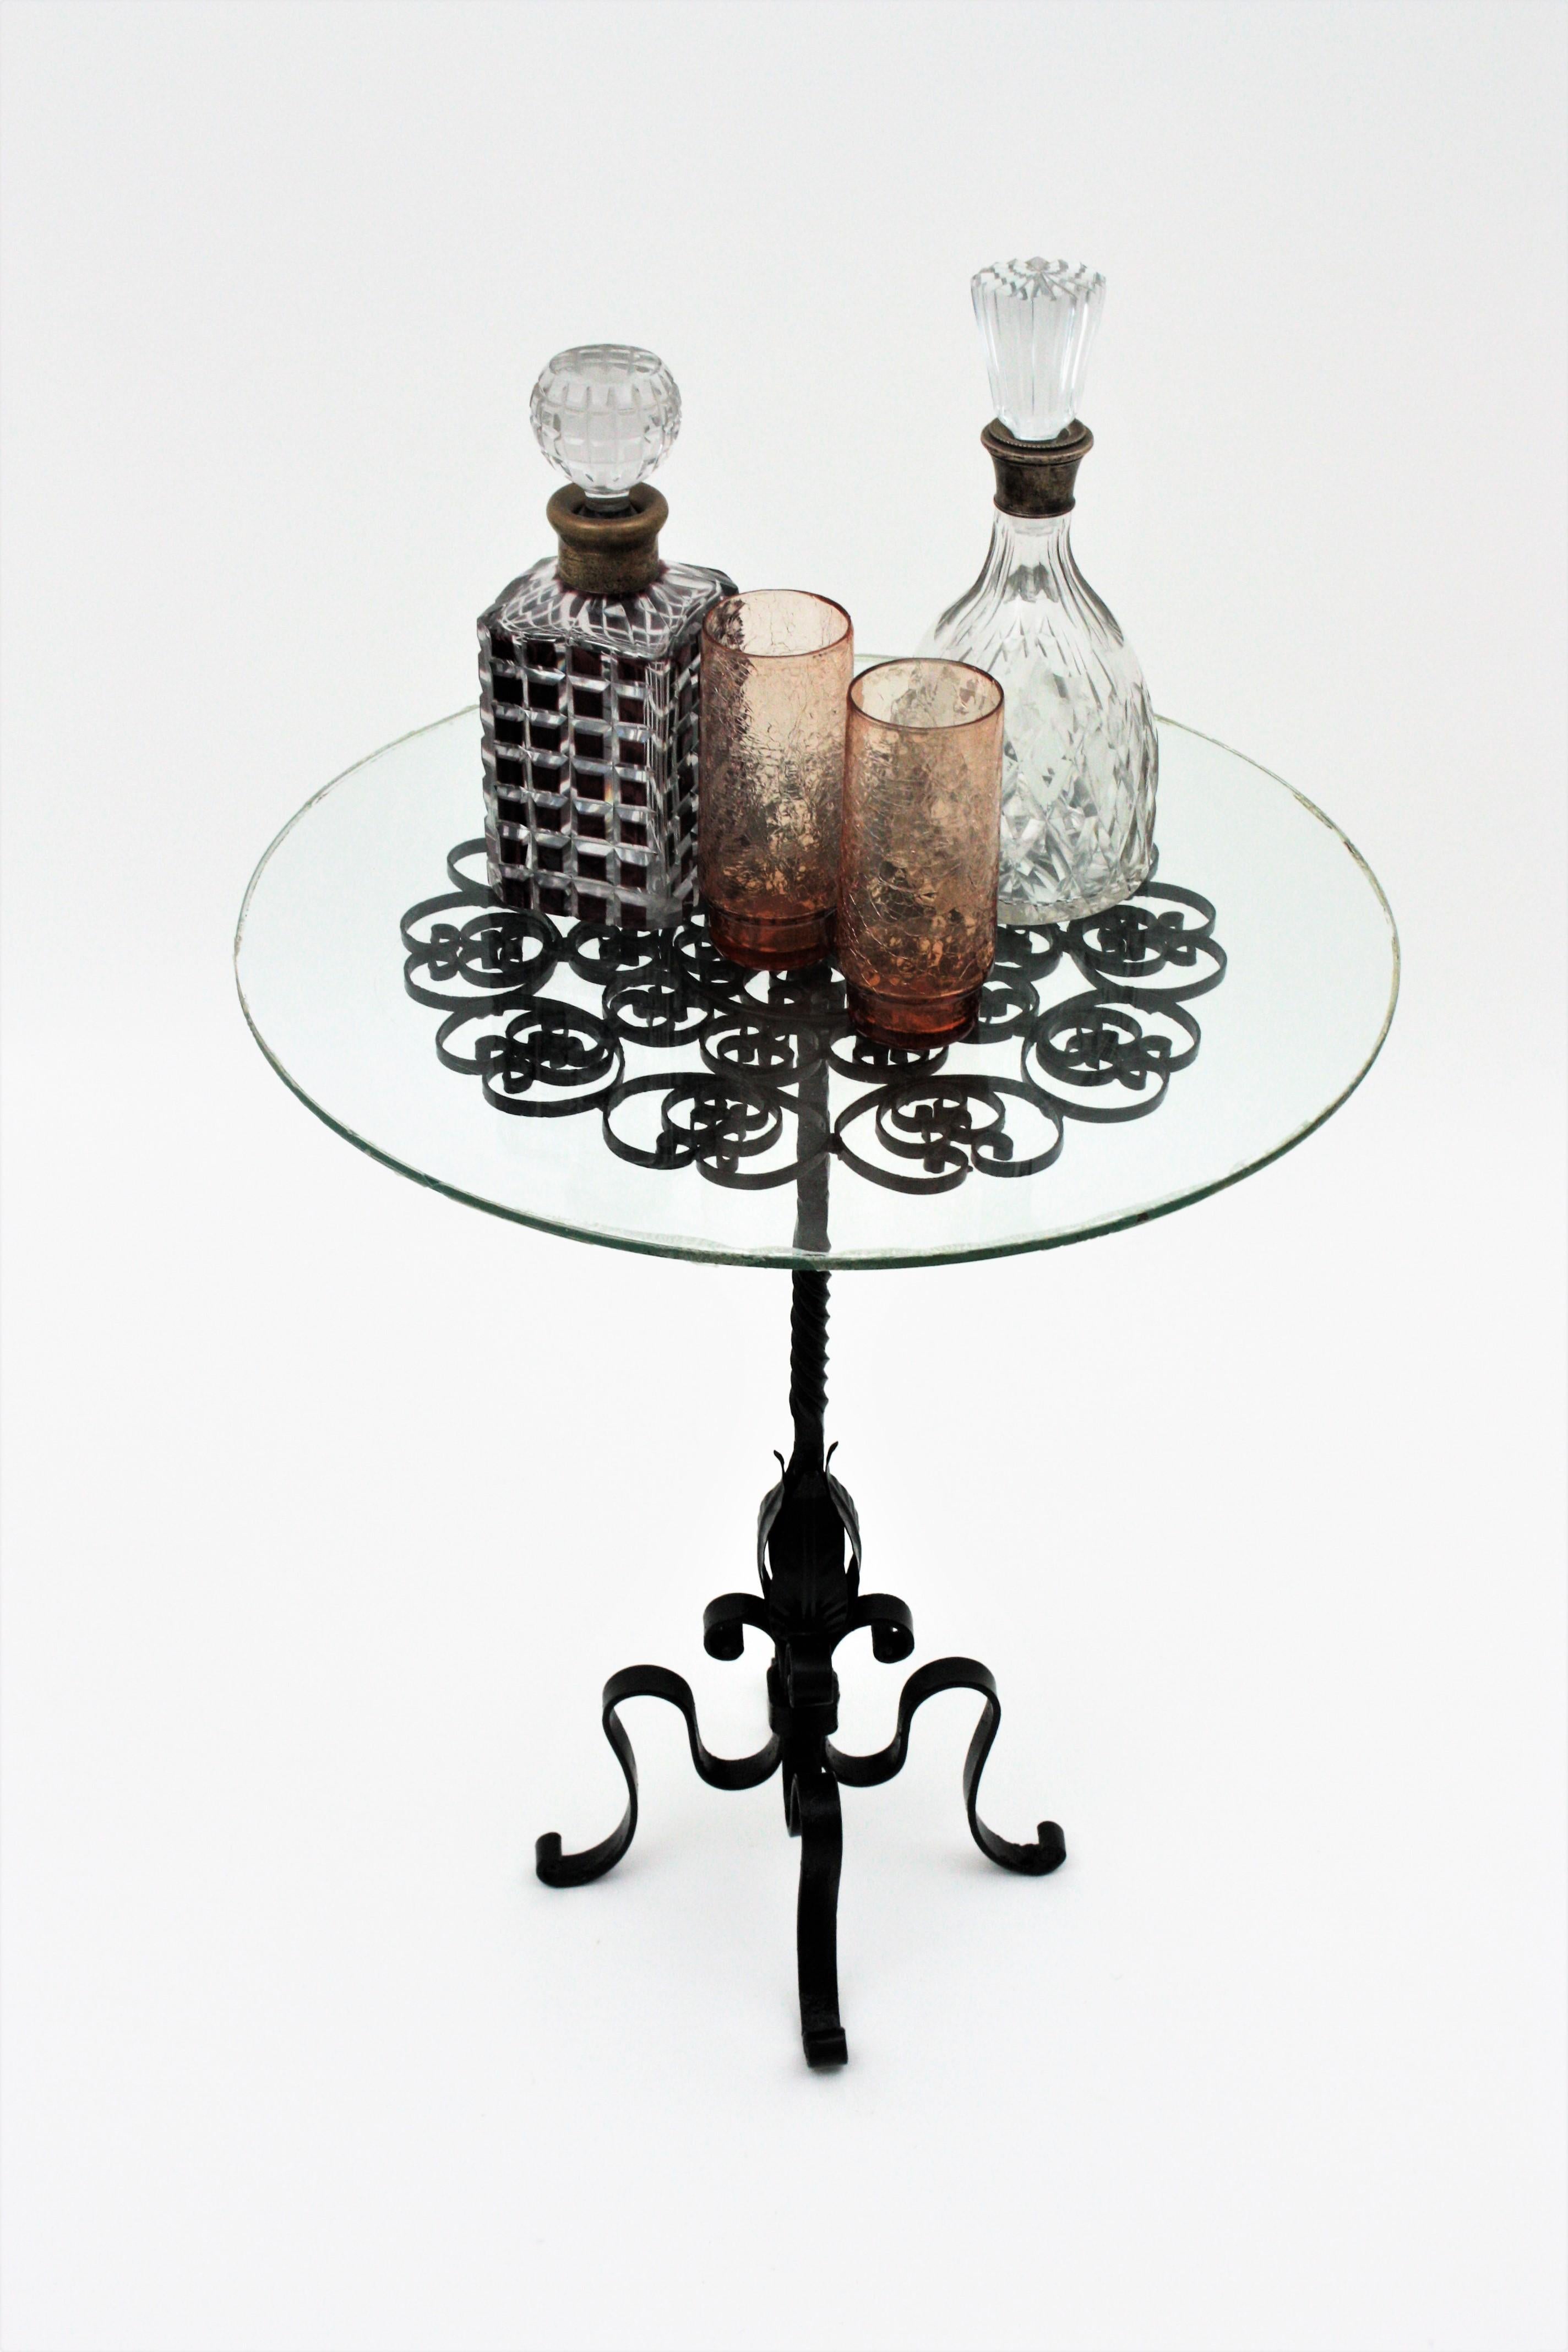 Black painted wrought iron round gueridon table with scroll detailed top, Spain, 1950s
The top is comprised by an intricate of scrolled iron pieces creating a beautiful effect. It stand on a four footed base with leafed accents and twisting